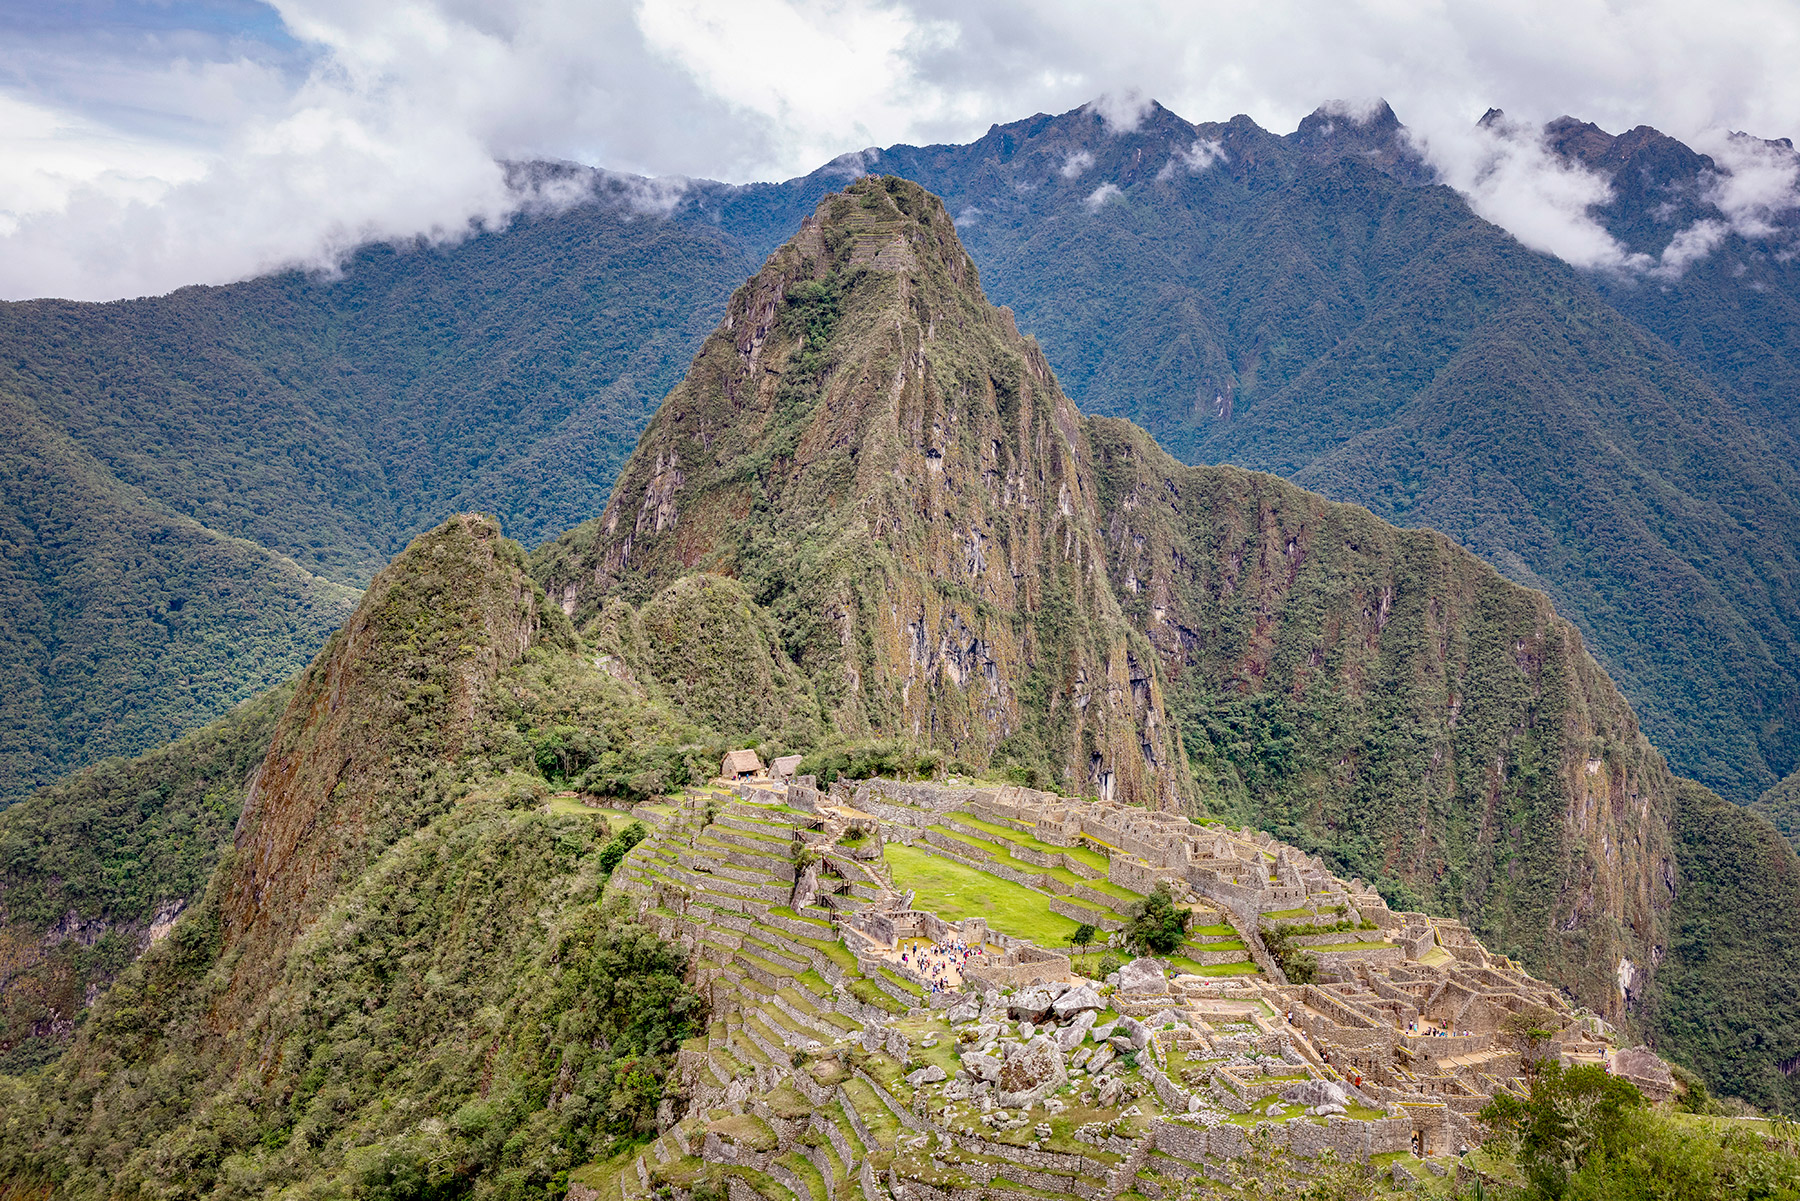 The view that everyone comes looking for: Machu Picchu